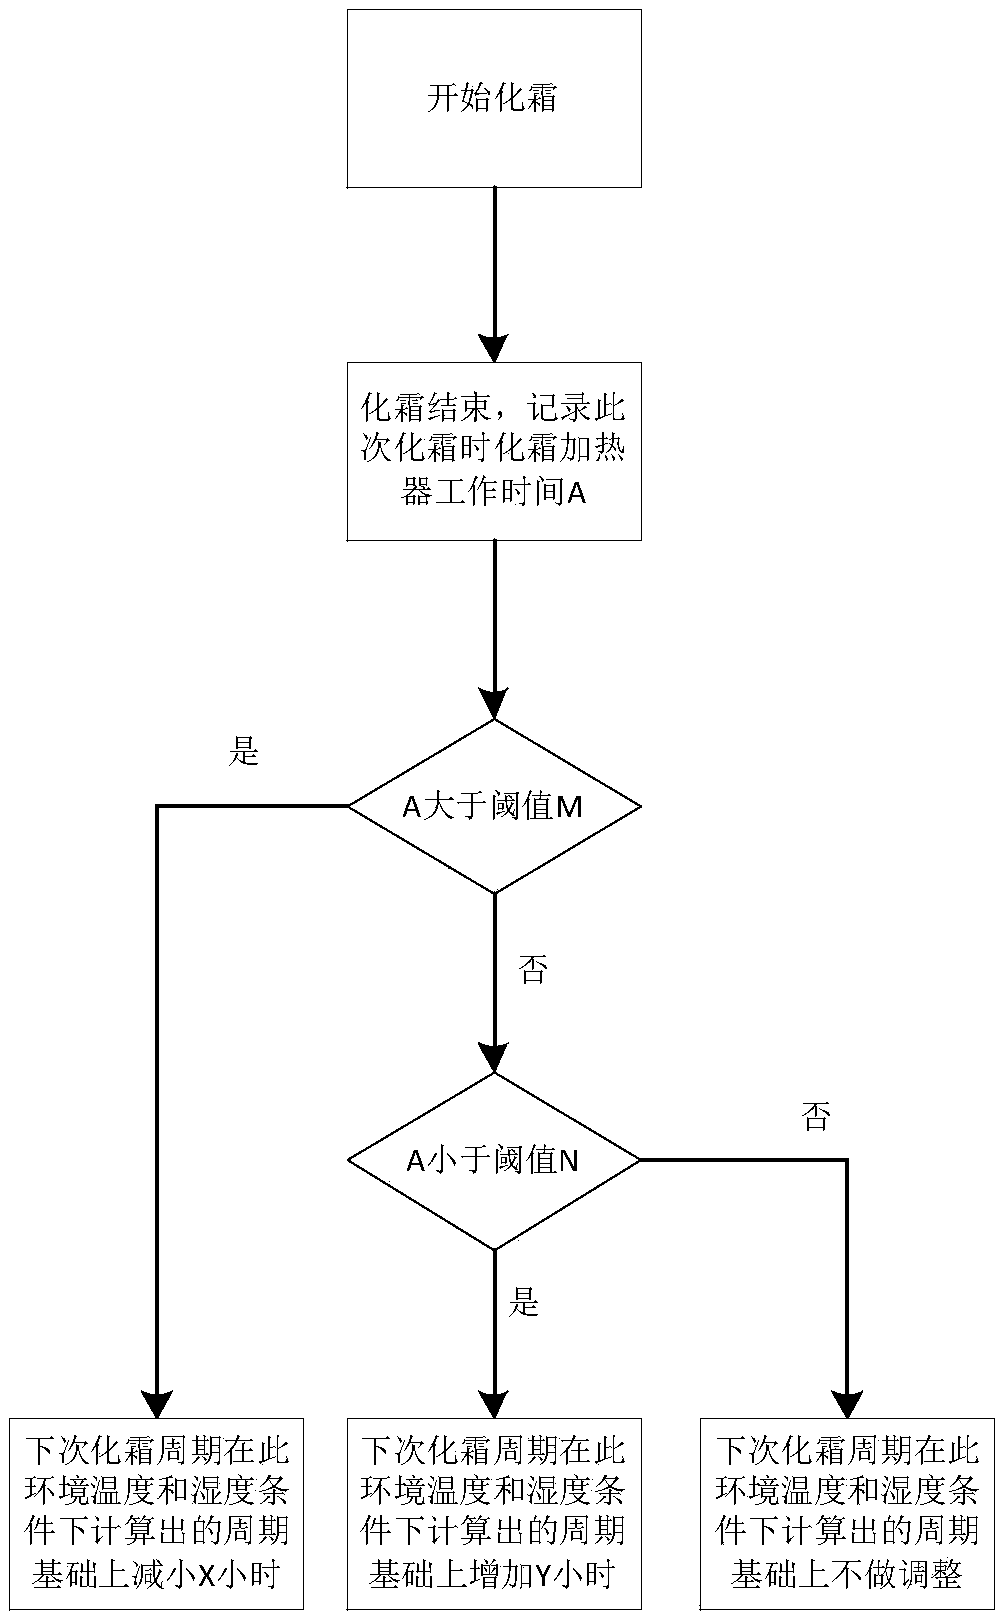 Adjustable defrosting control method and system, equipment and readable storage medium